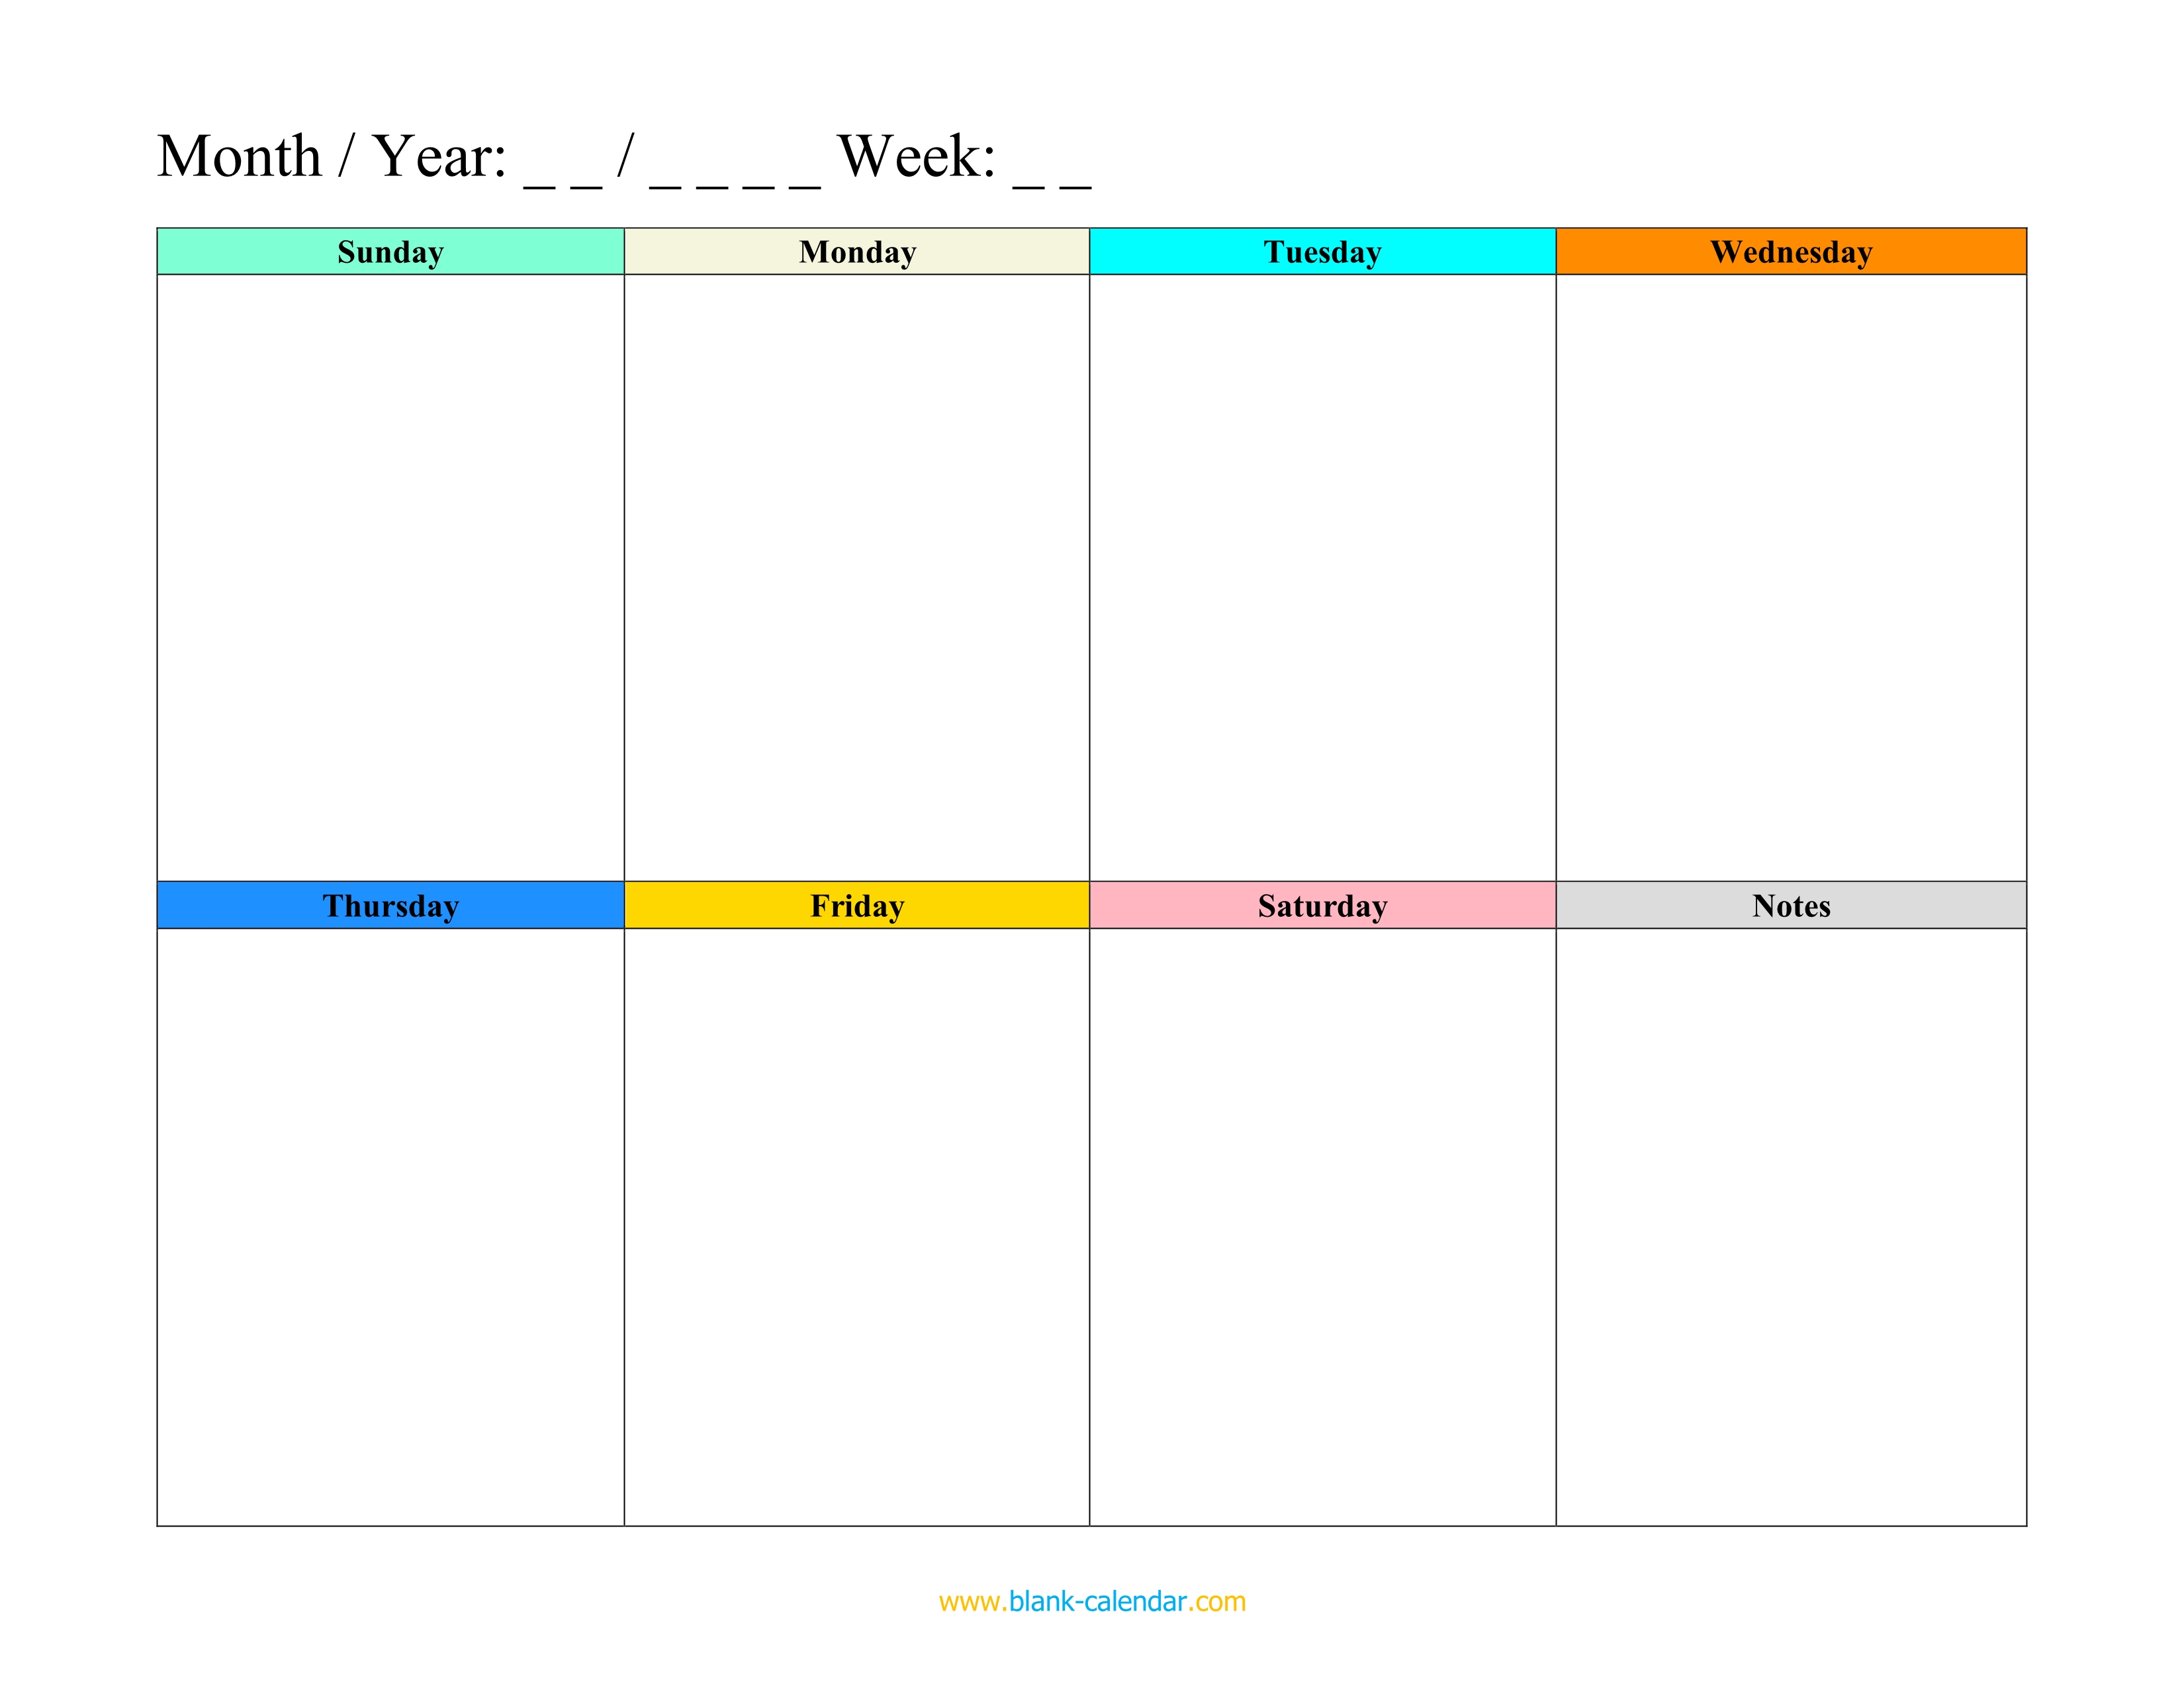 free-printable-appointment-schedule-template-doctemplates